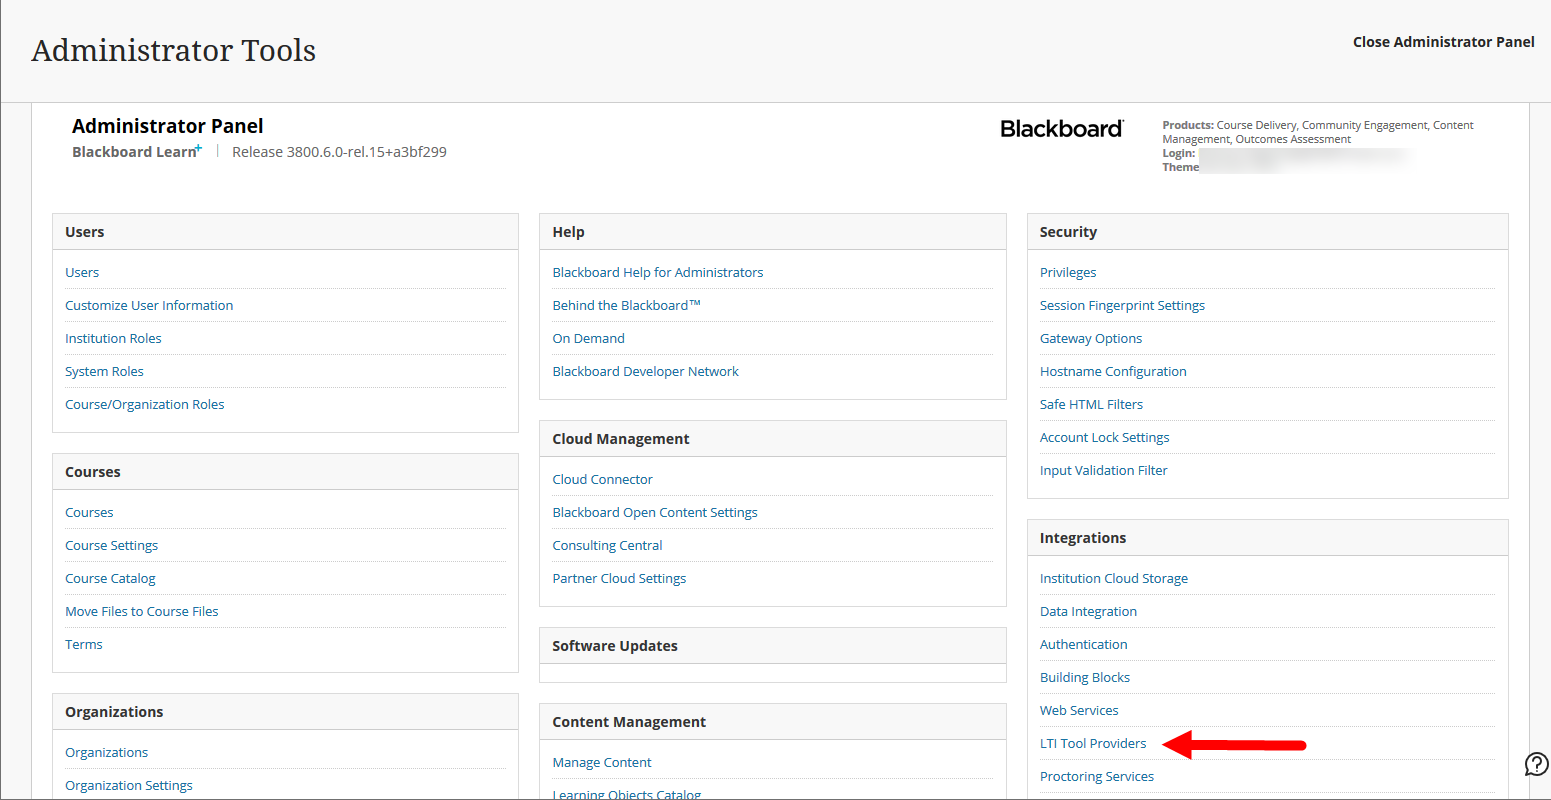 System Admin panel of Blackboard with LTI Tool Providers option identified for selection as described